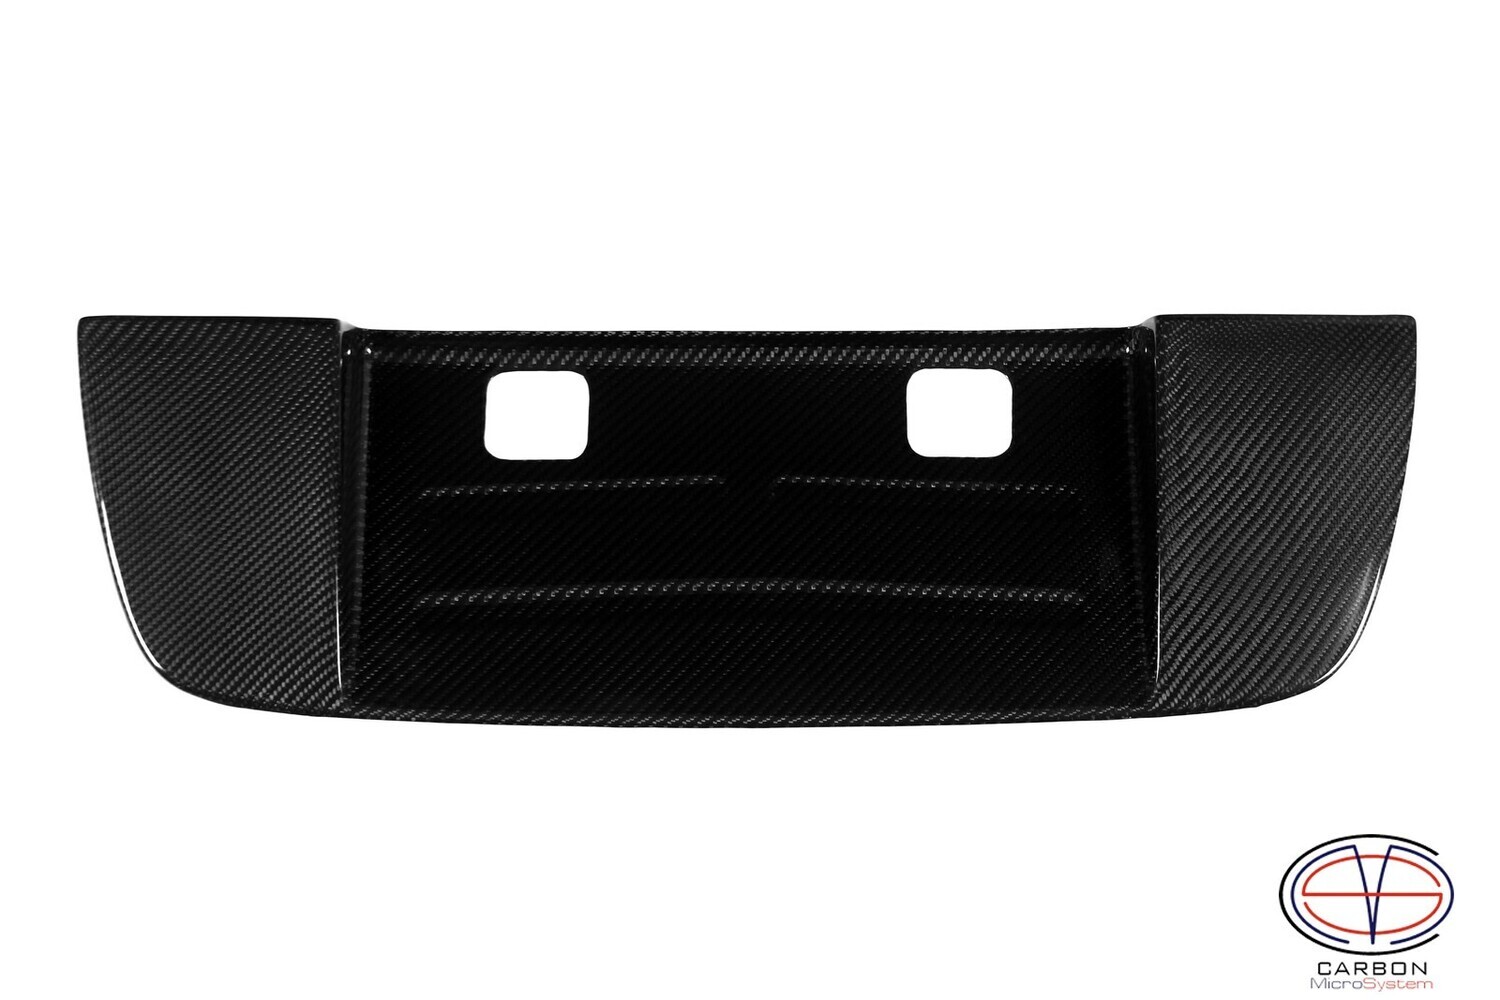 Short number plate panel surround from Carbon Fiber for Lexus GS300, Aristo jzs161